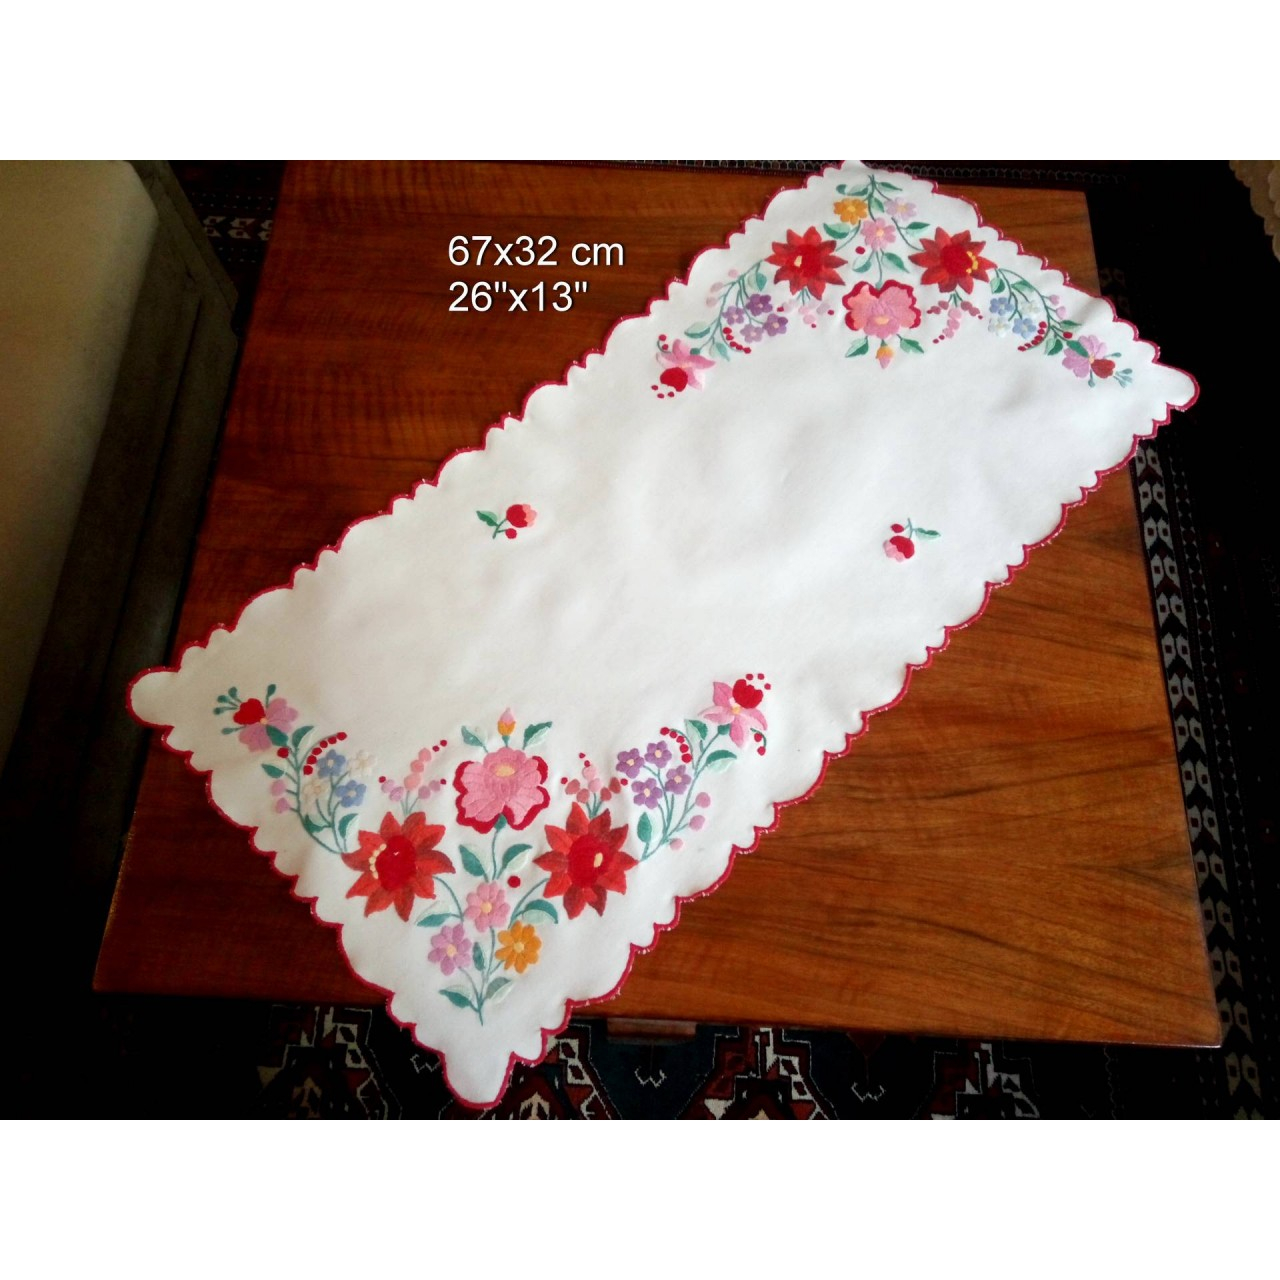 Vintage Floral Embroidery Patterns Embroidered Tablecloth With Kalocsa Floral Motives Kalocsa Runner